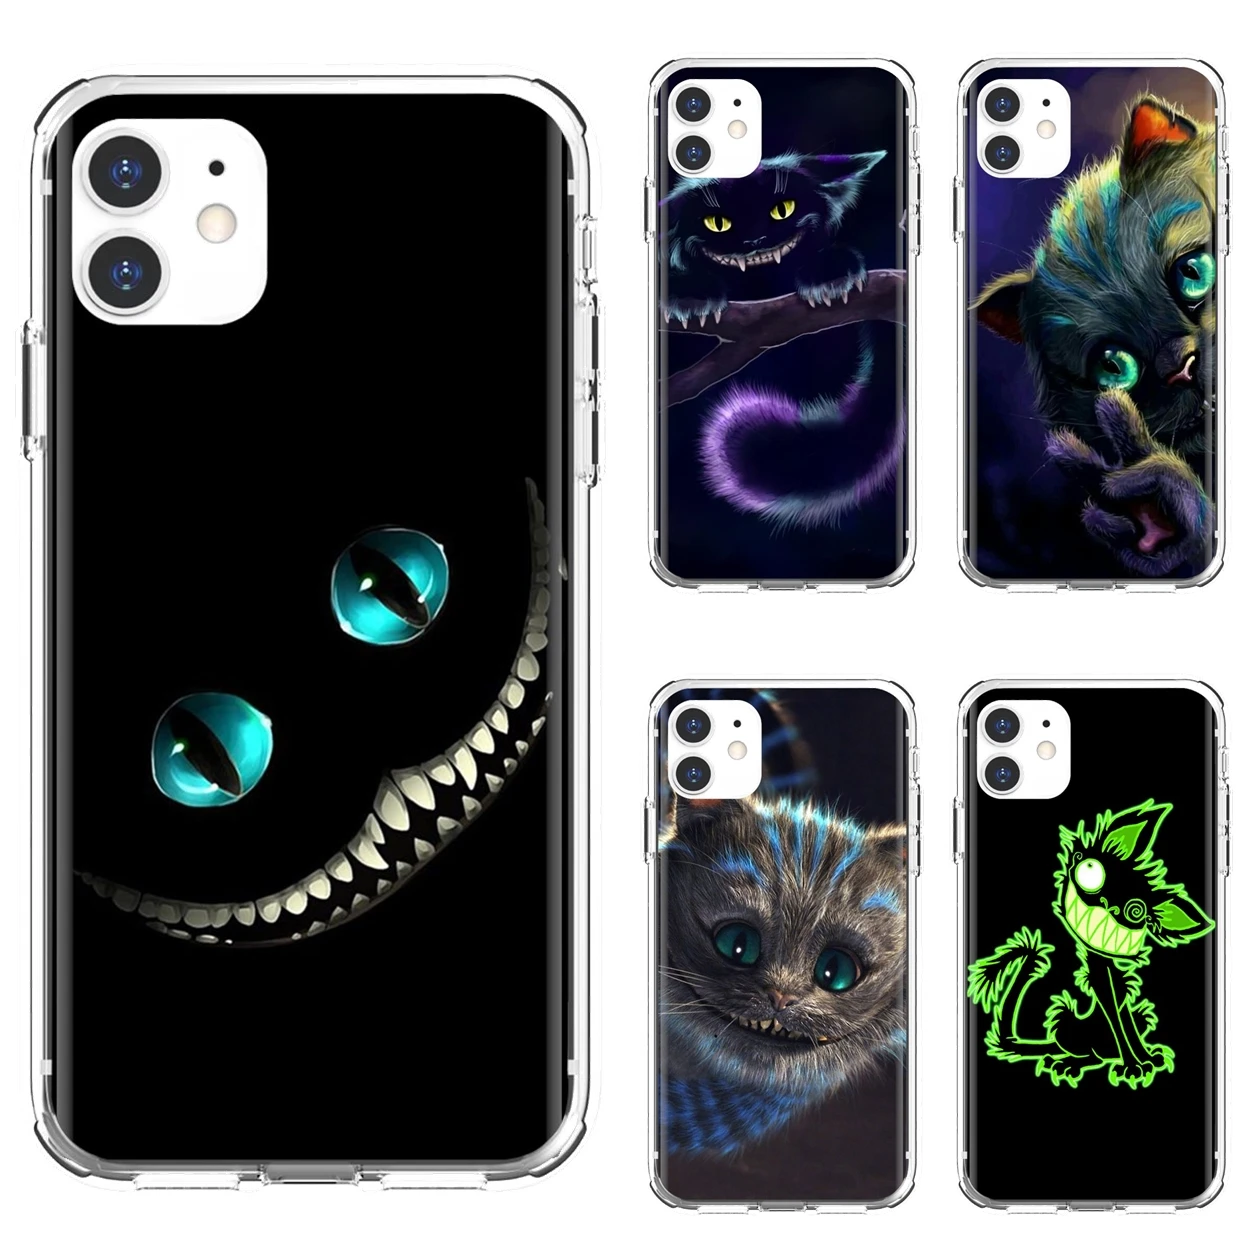 Soft Shell Covers For iPod Touch 5 6 Xiaomi Redmi S2 6 Pro 5A Pocophone F1 LG G6 Q6 Q7 G5 Alice in Wonderland Cheshire Cat Funny